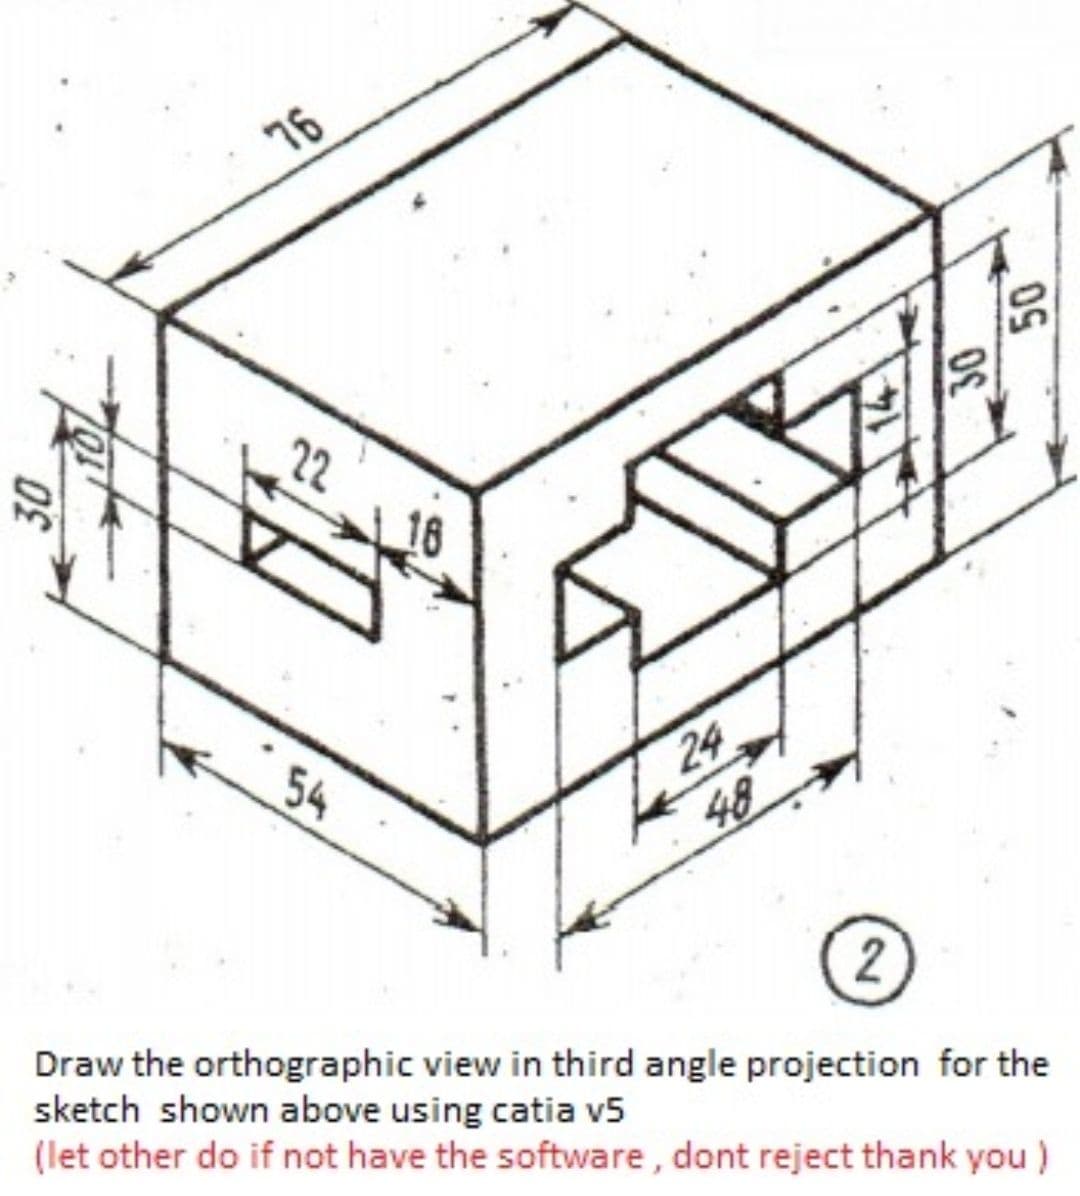 76
22
54
24
48
2
Draw the orthographic view in third angle projection for the
sketch shown above using catia v5
(let other do if not have the software, dont reject thank you)
30
